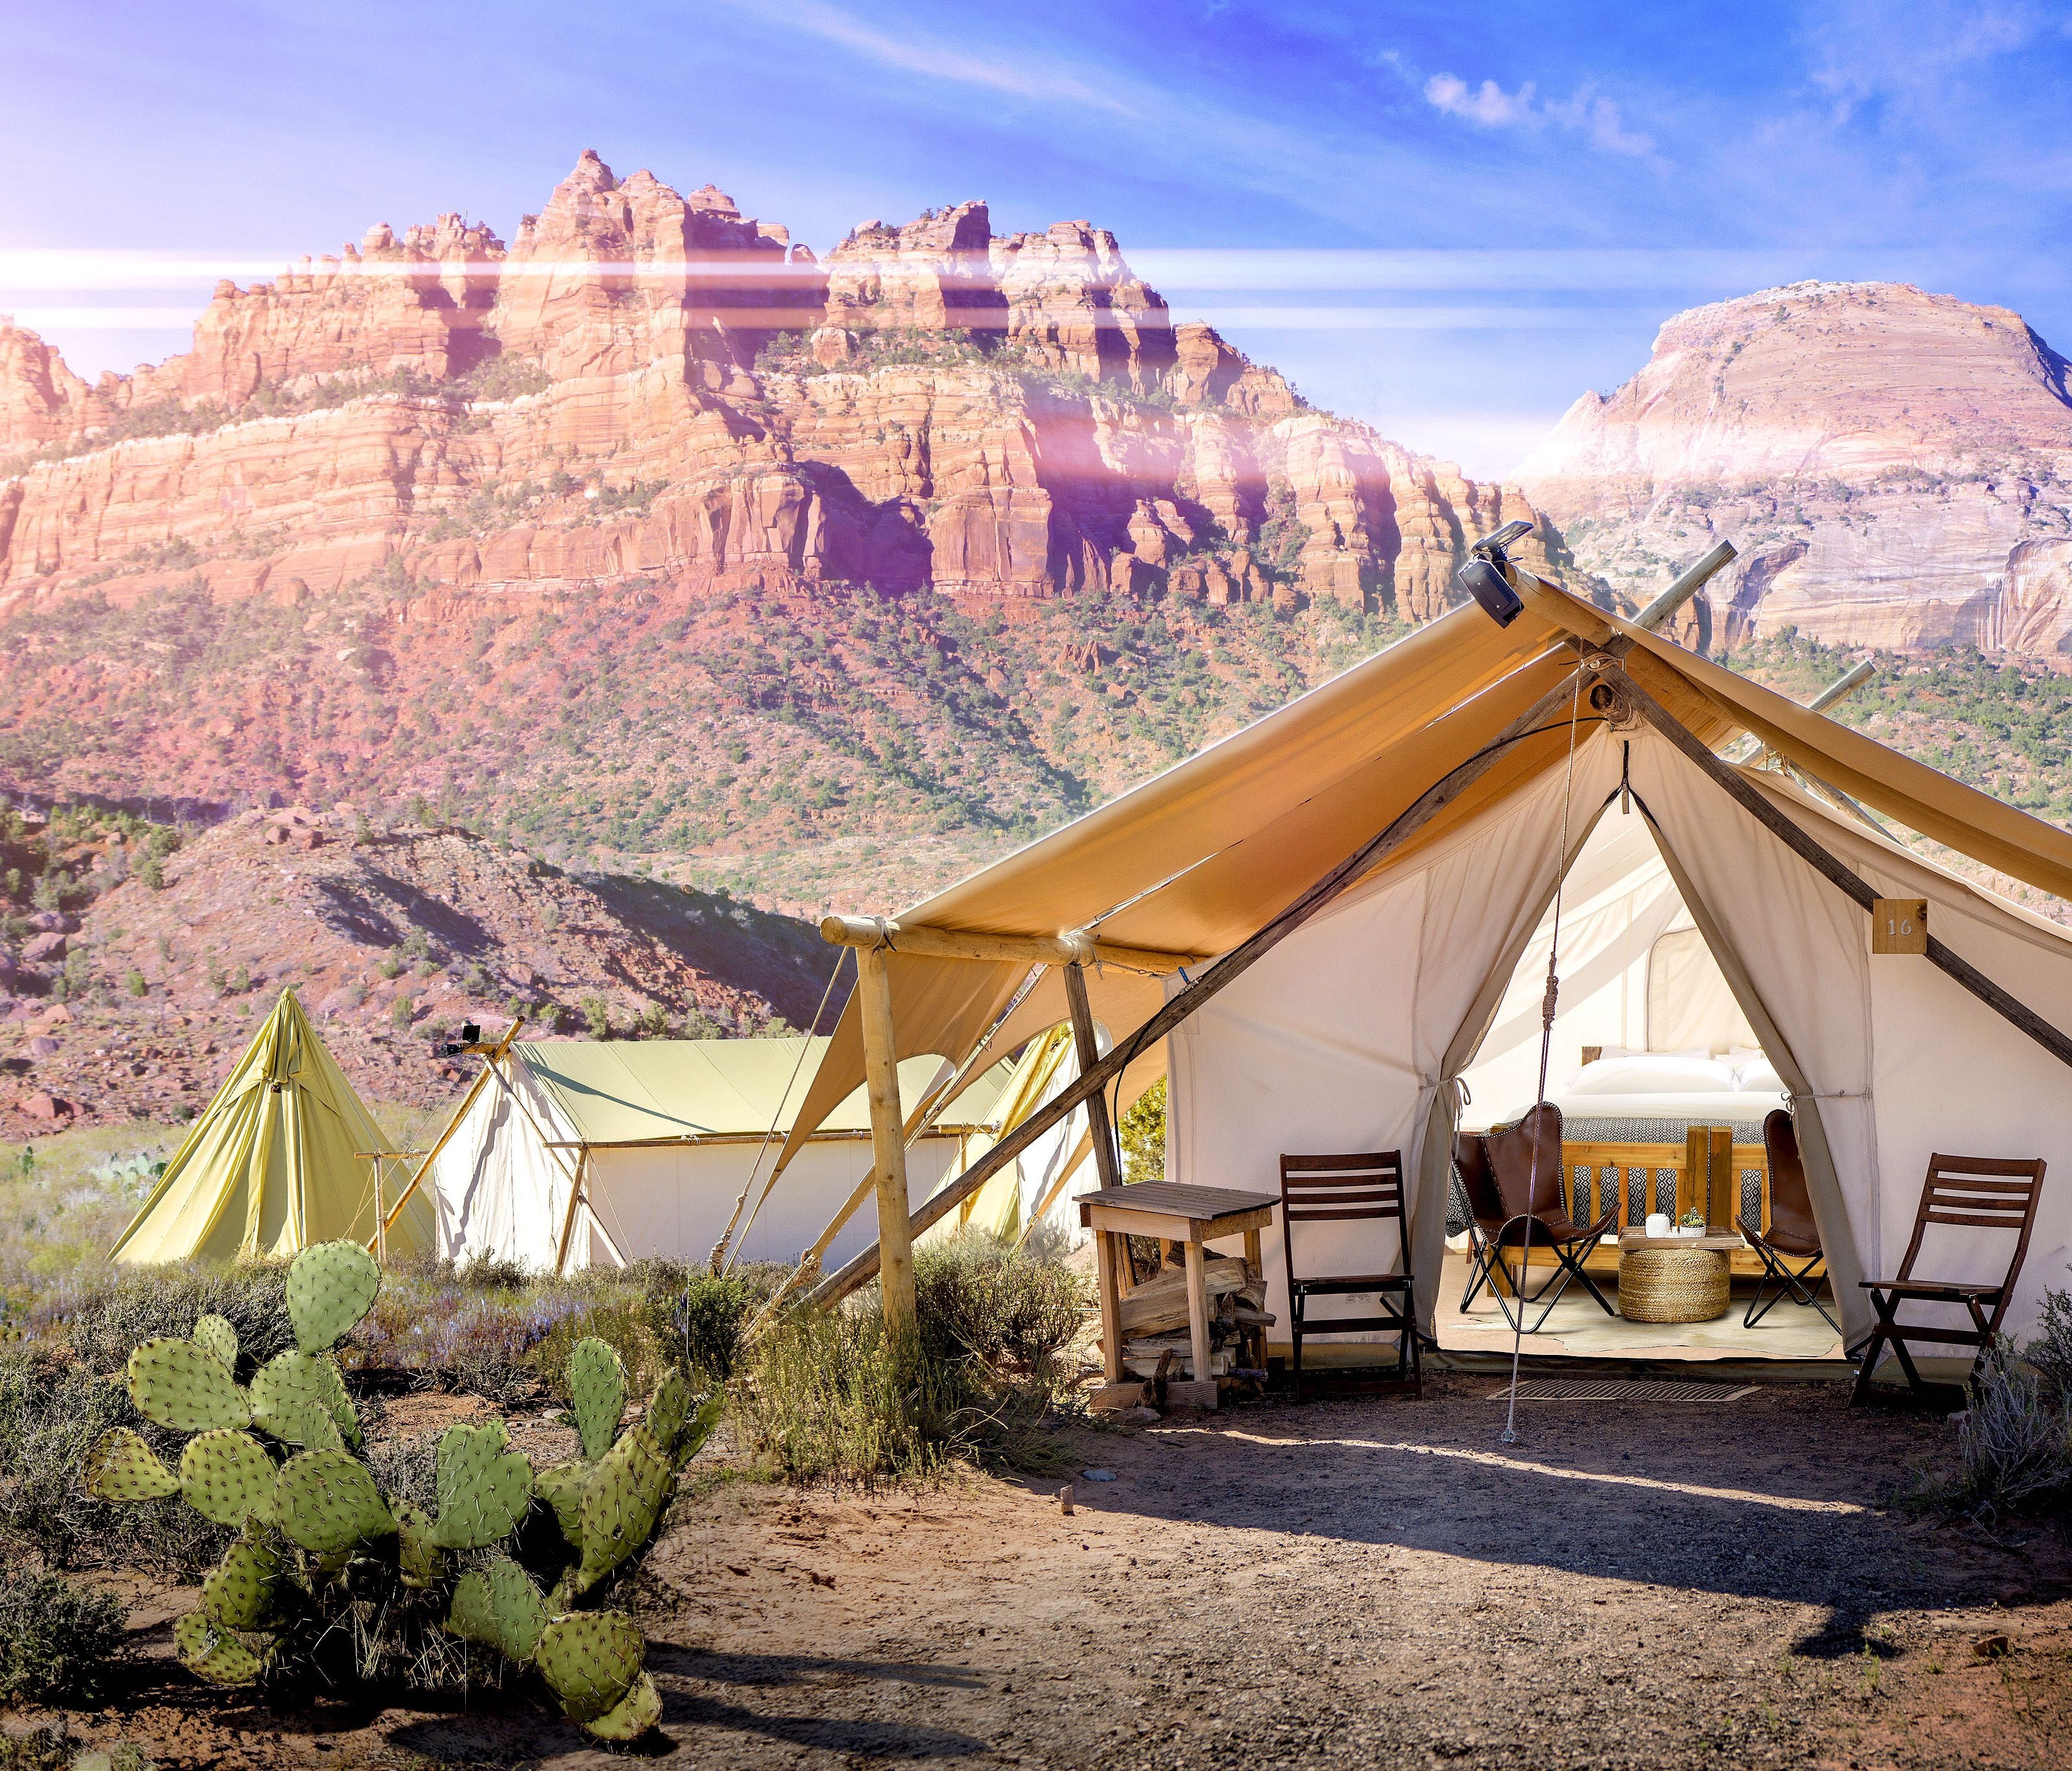 Having opened this August, Under Canvas Zion has stunning views of the area's landscapes.